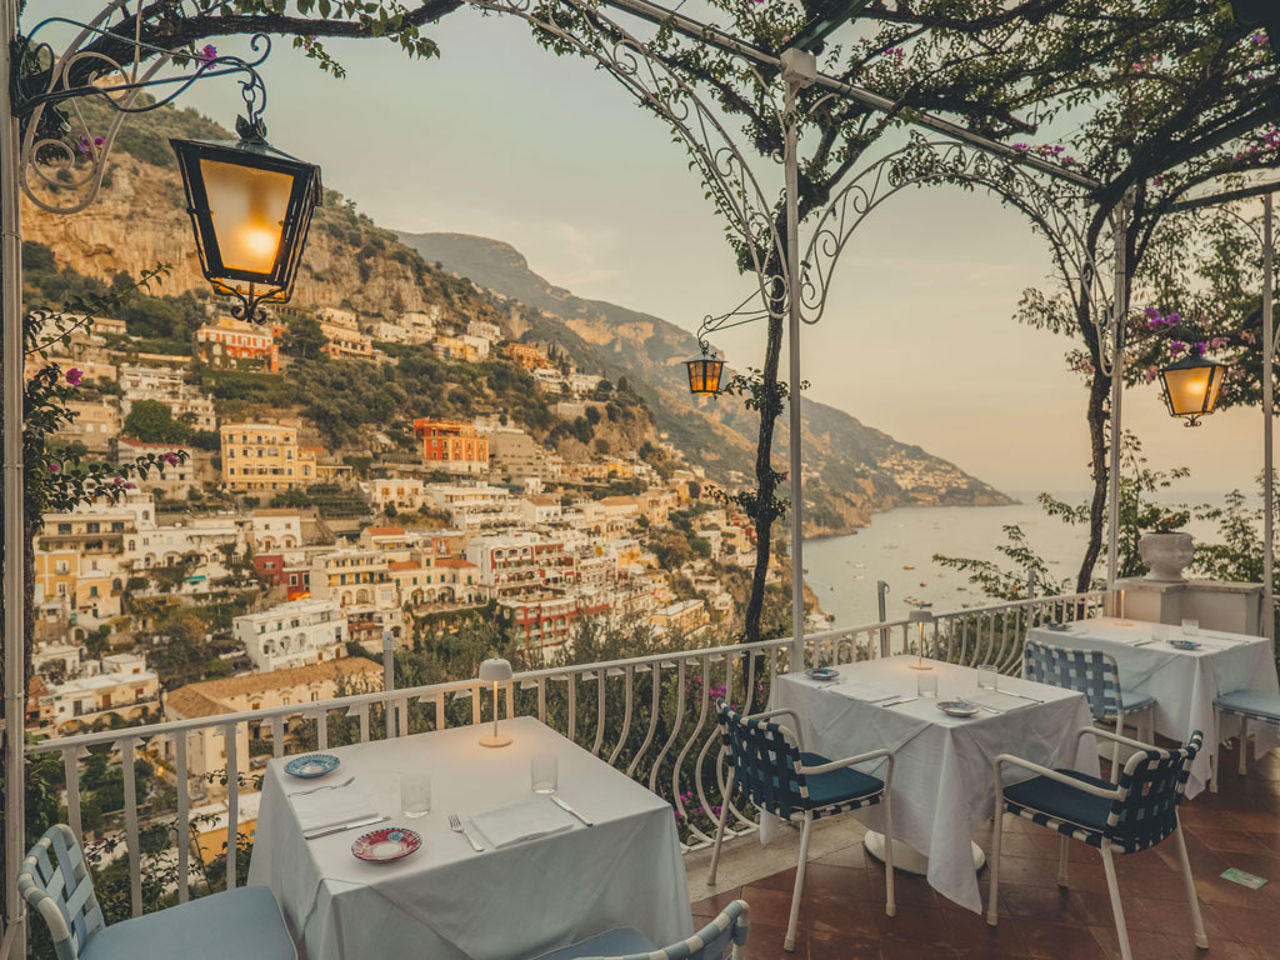 Official Website Hotel Poseidon in Positano | Book now a stay